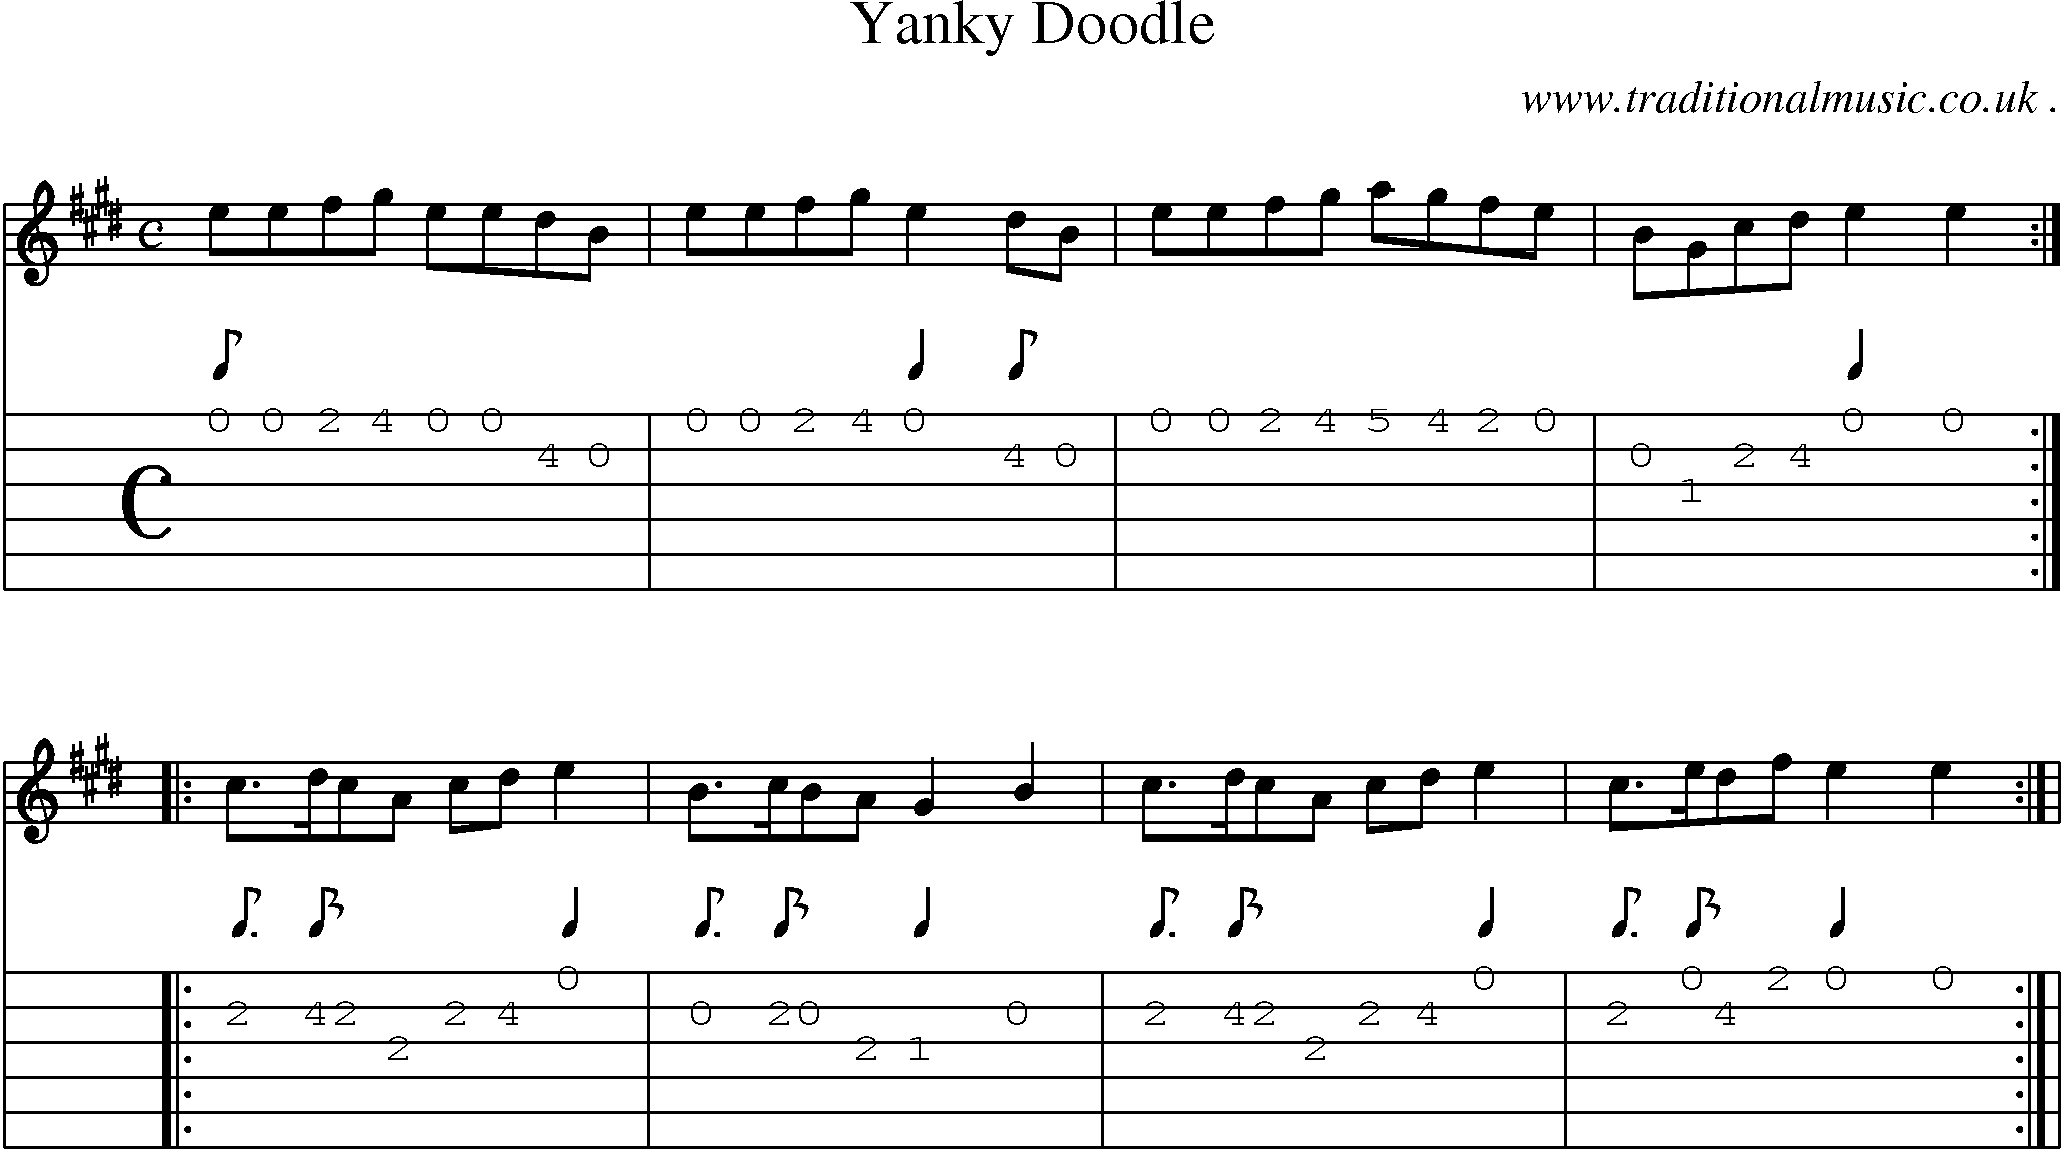 Sheet-Music and Guitar Tabs for Yanky Doodle